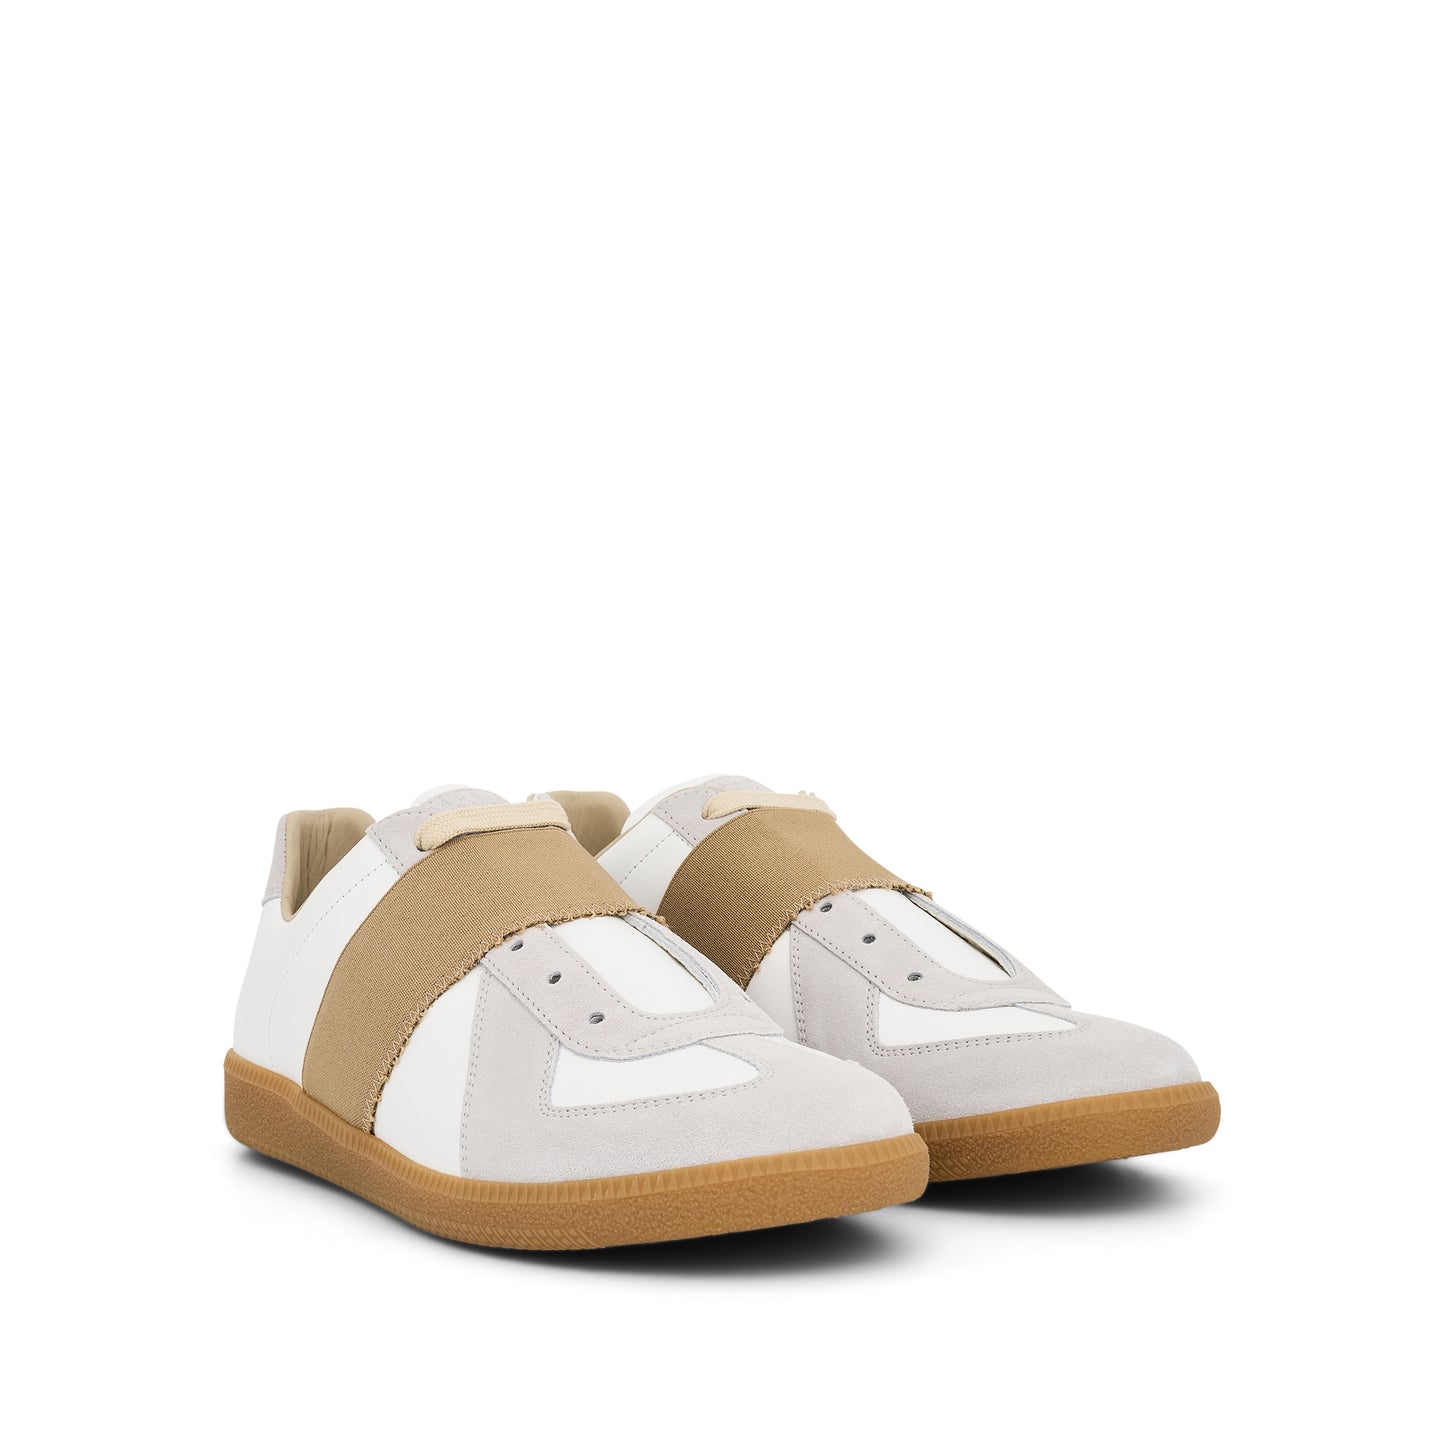 Replica Sneakers with Elastic Band in White/Nude